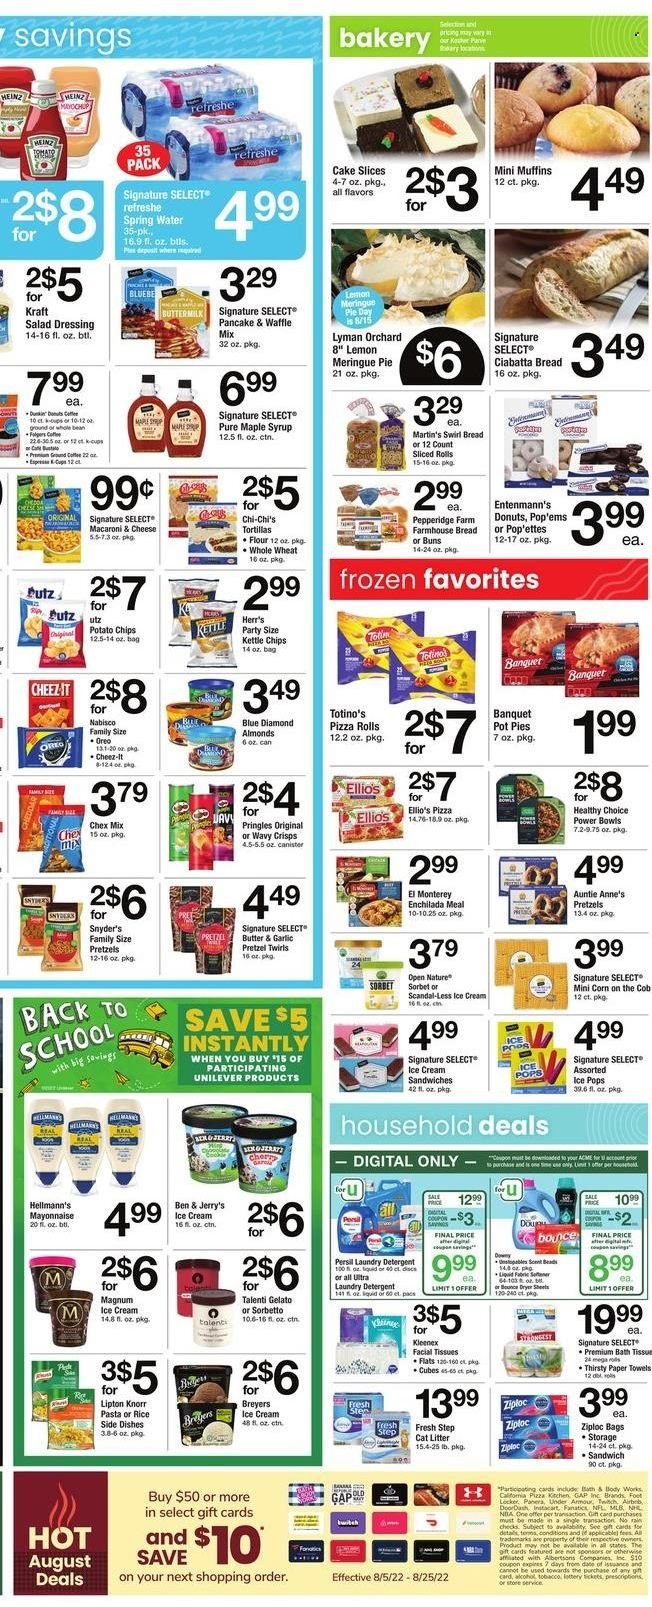 thumbnail - ACME Flyer - 08/12/2022 - 08/18/2022 - Sales products - Under Armour, bread, ciabatta, tortillas, pretzels, cake, pie, pizza rolls, buns, pot pie, donut, muffin, Entenmann's, corn, enchiladas, macaroni & cheese, pizza, Knorr, pancakes, Healthy Choice, Kraft®, Oreo, buttermilk, mayonnaise, Hellmann’s, ice cream, ice cream sandwich, Ben & Jerry's, Talenti Gelato, gelato, 7 Days, potato chips, Pringles, Cheez-It, Chex Mix, Heinz, rice, salad dressing, dressing, maple syrup, syrup, almonds, Blue Diamond, Lipton, spring water, Folgers, gin, Kleenex, tissues, kitchen towels, paper towels, detergent, Unstopables, Persil, laundry detergent, Bounce, dryer sheets, facial tissues, Ziploc, cat litter, Fresh Step. Page 3.